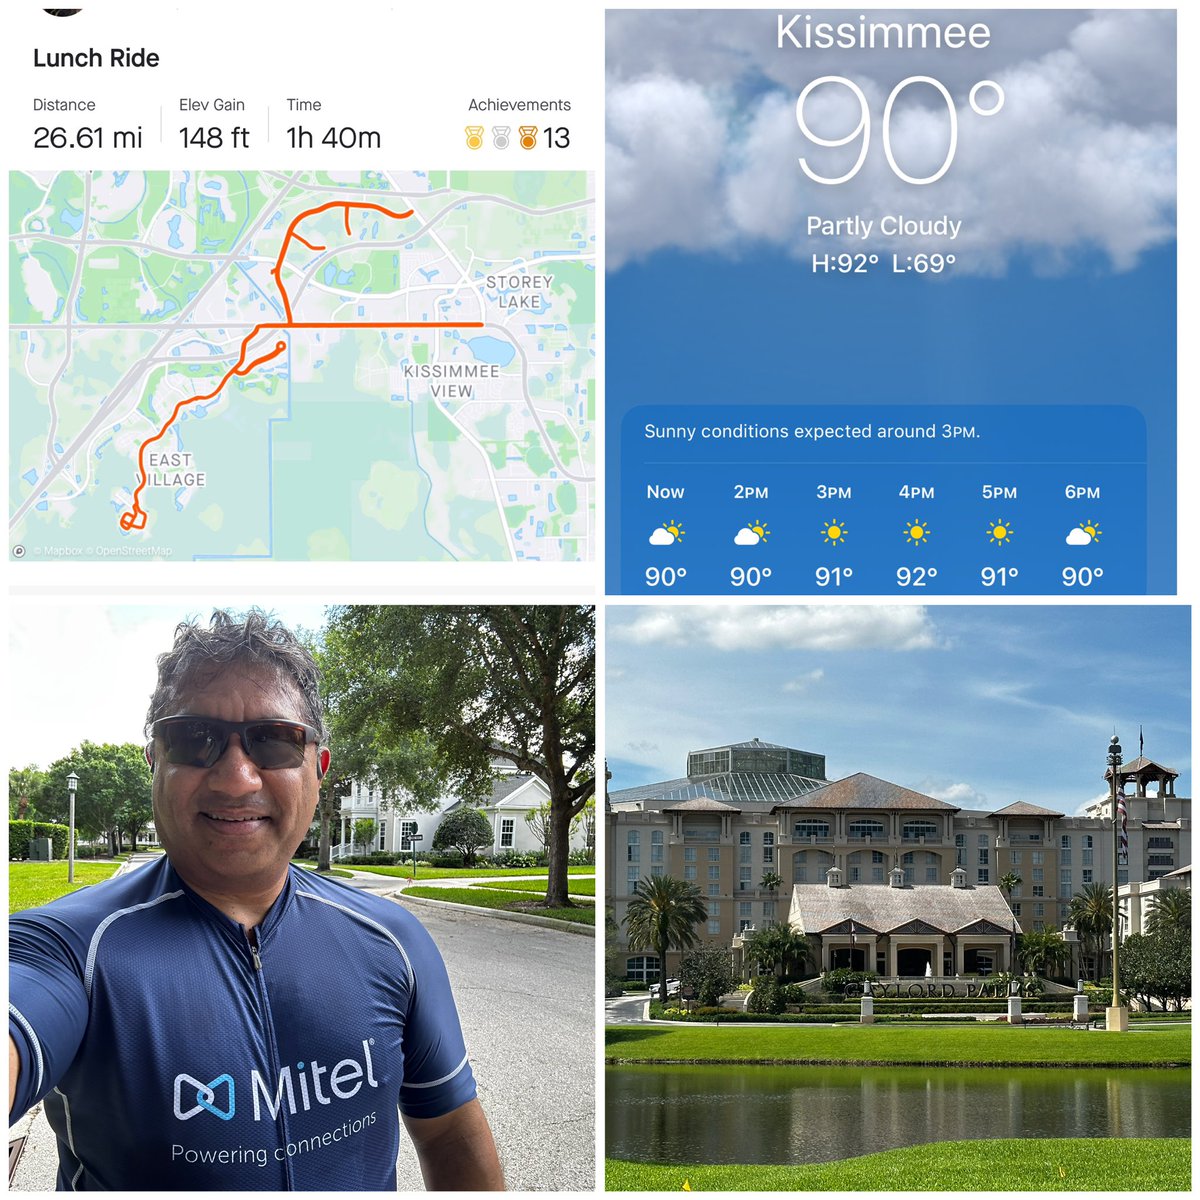 OMG it’s HOT out there! I haven’t biked in temp that hot since Dubai!! @Mitel #enterpriseconnect #uc #cc #cx #innovation #cycleflorida @VirveVirtanen